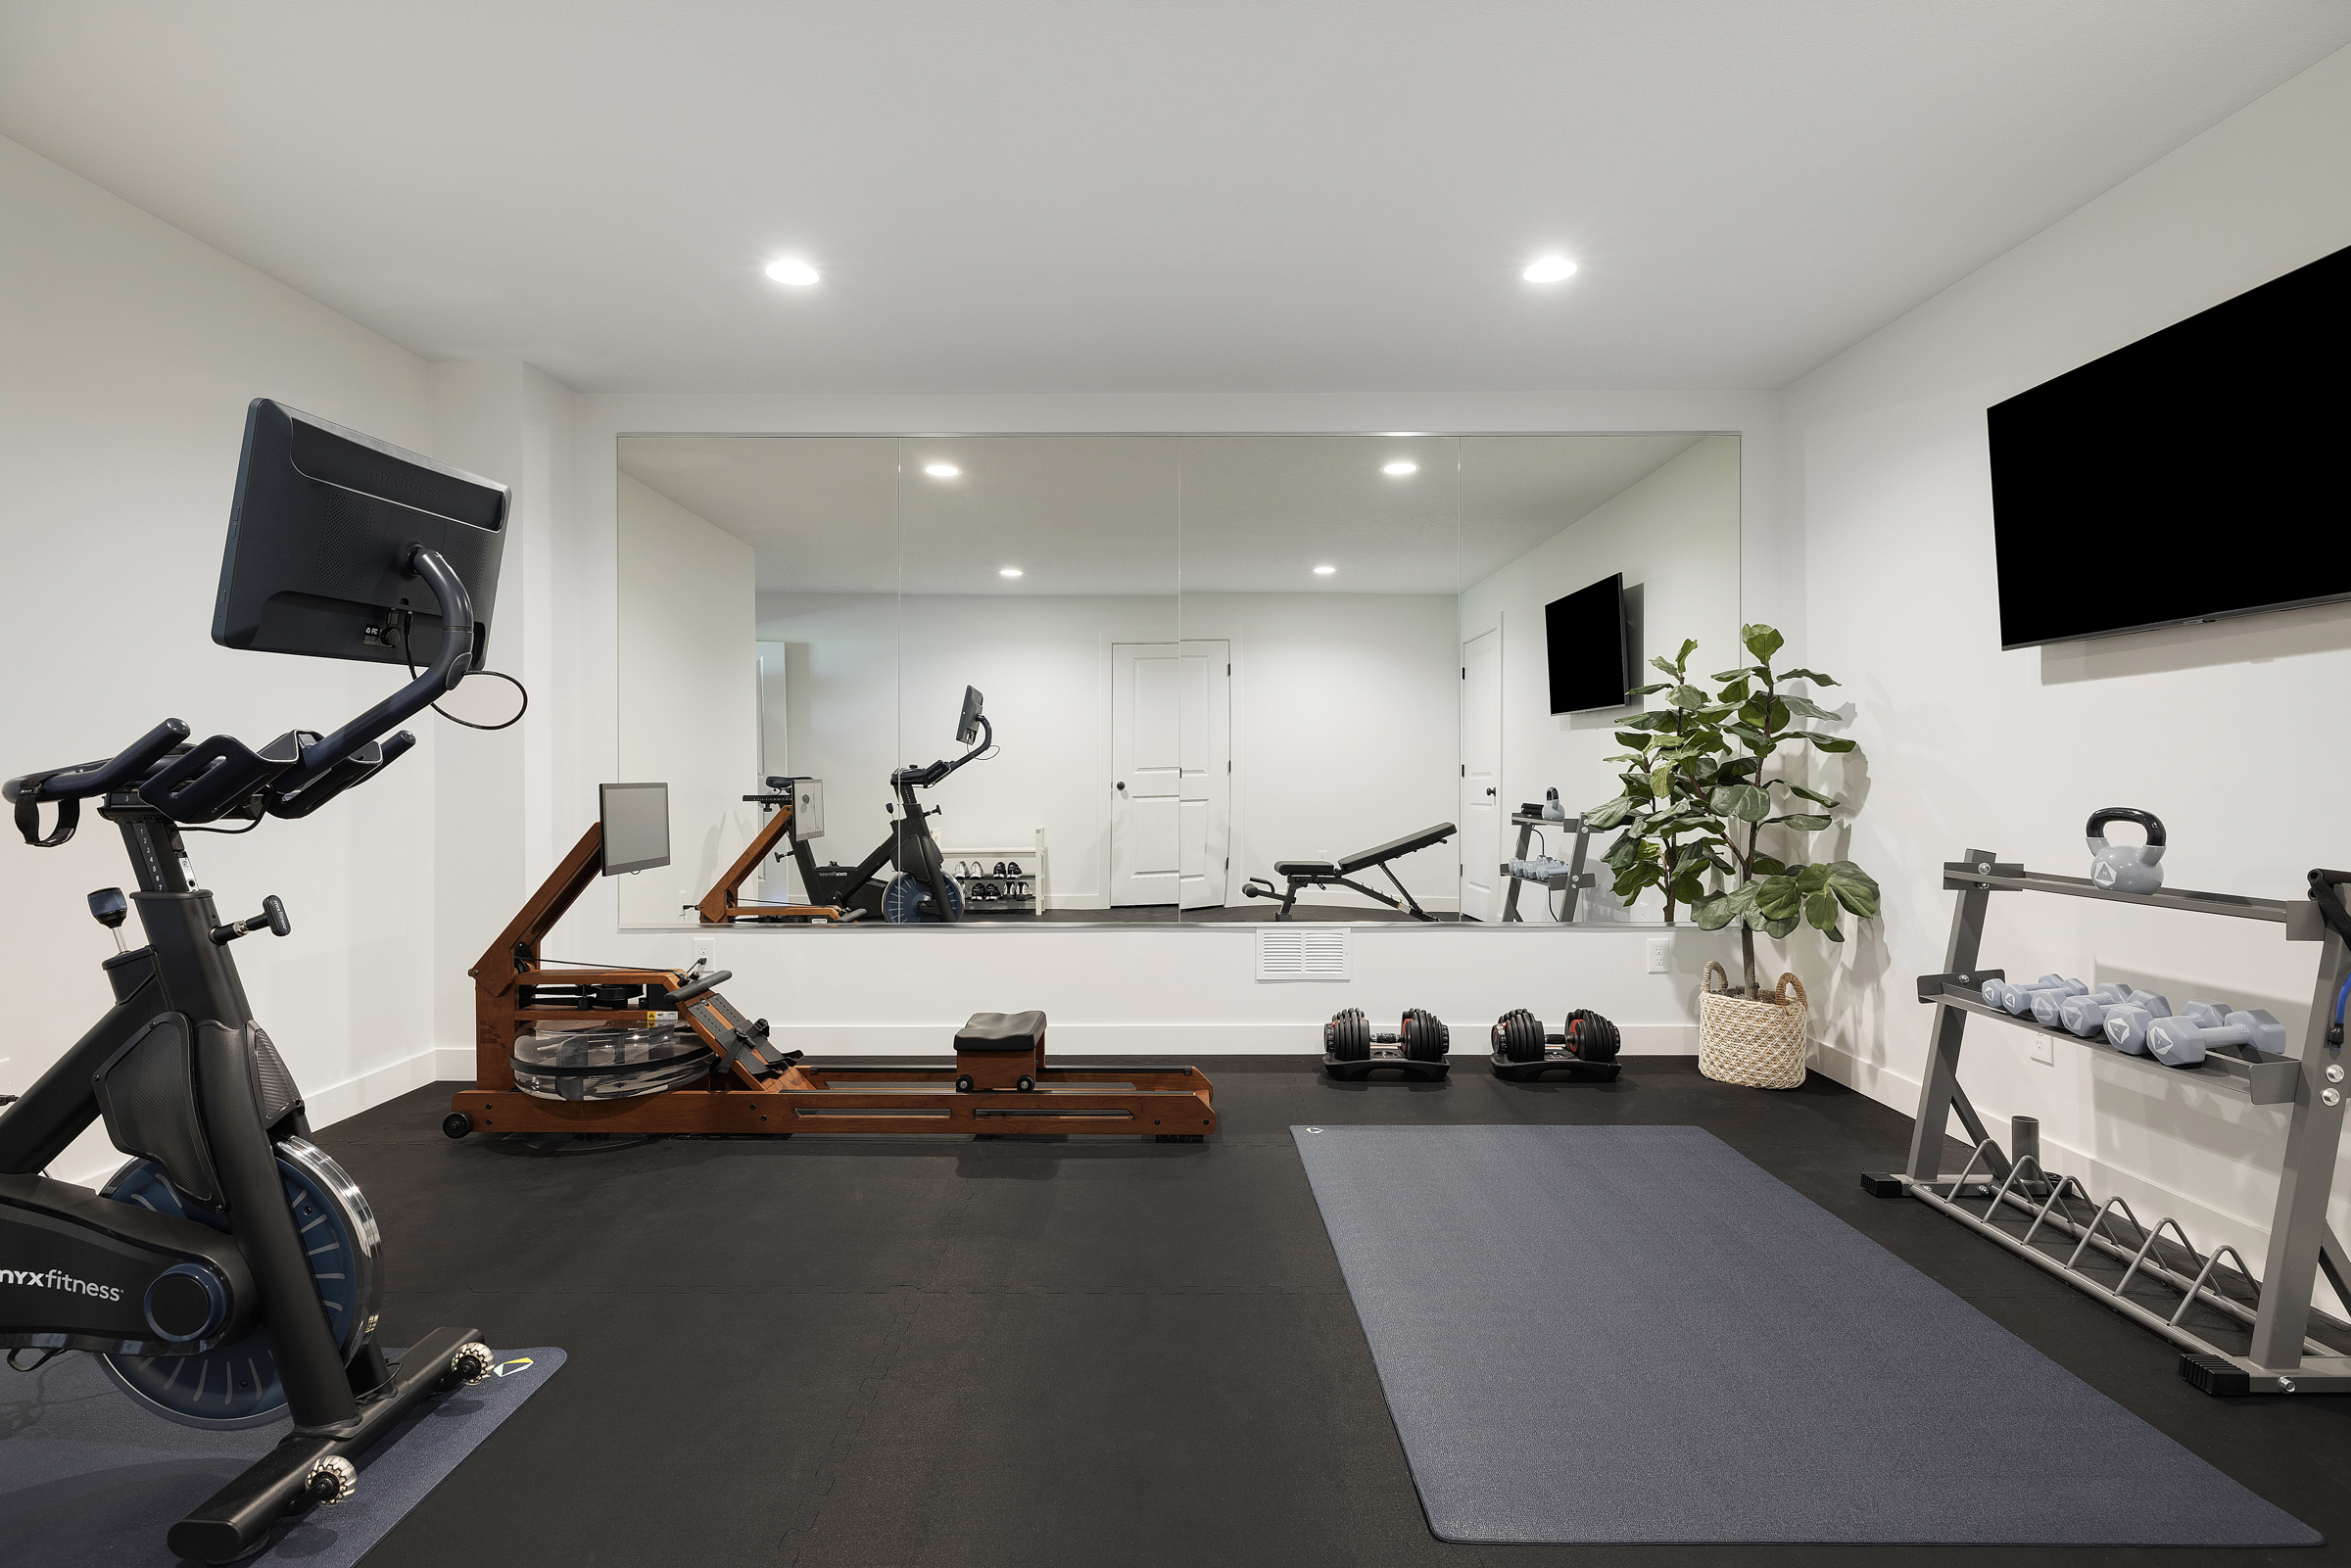 The Styled Press Gym Reveal | Before and After